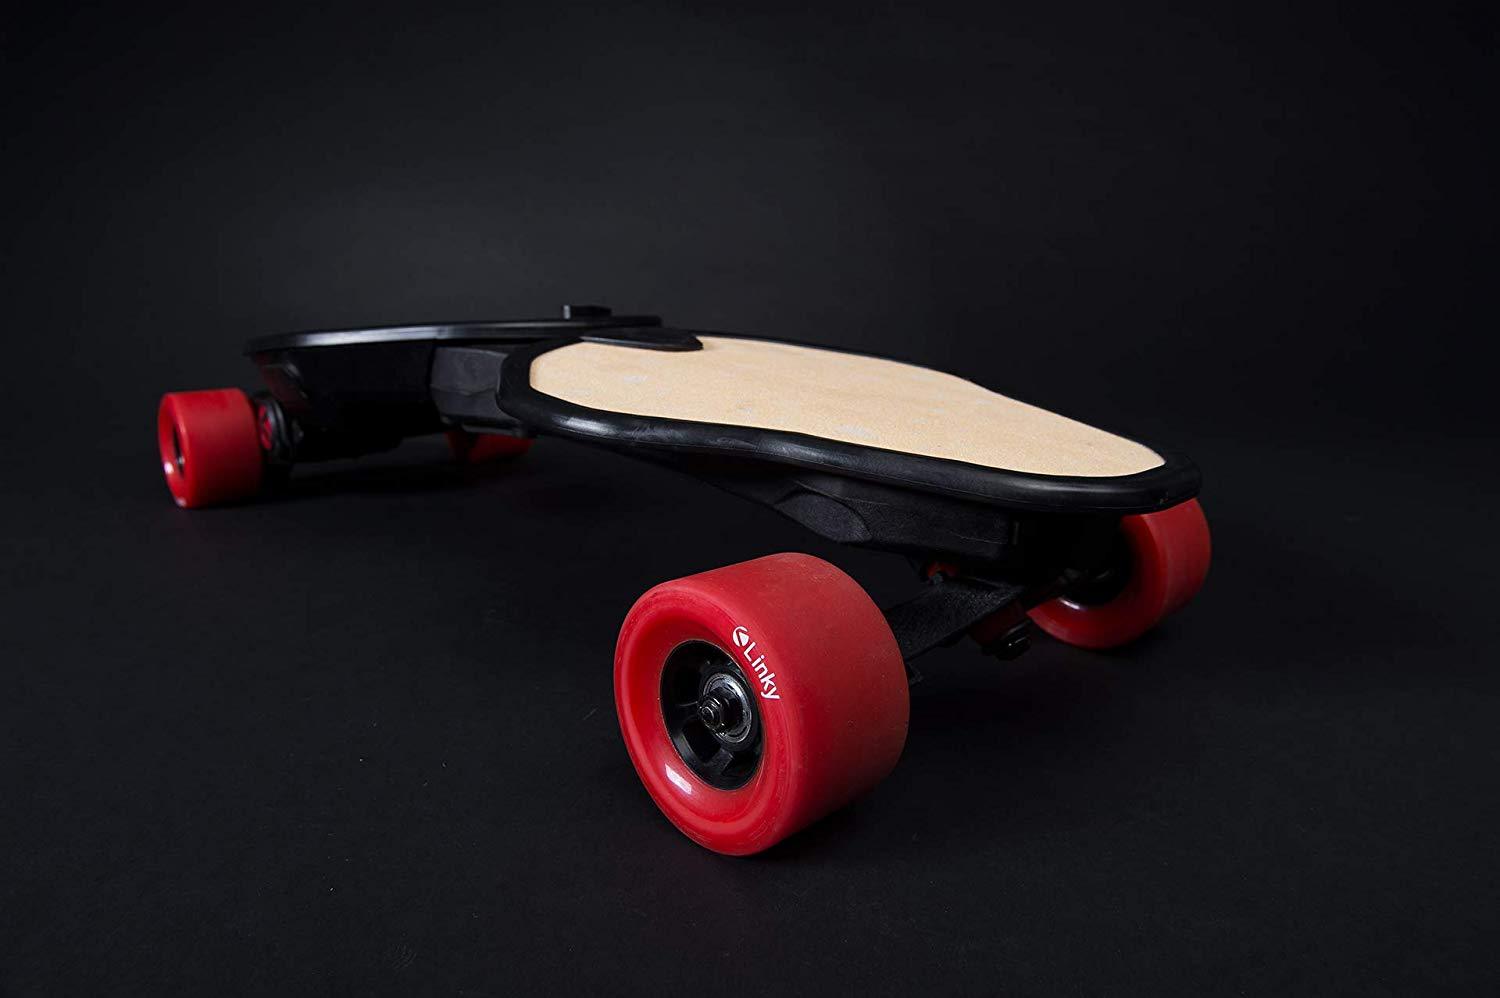 Linky Innovation, Linky Innovation LINKYBAMBOO 32" High Performance Foldable Electric Skateboard Bamboo Deck New